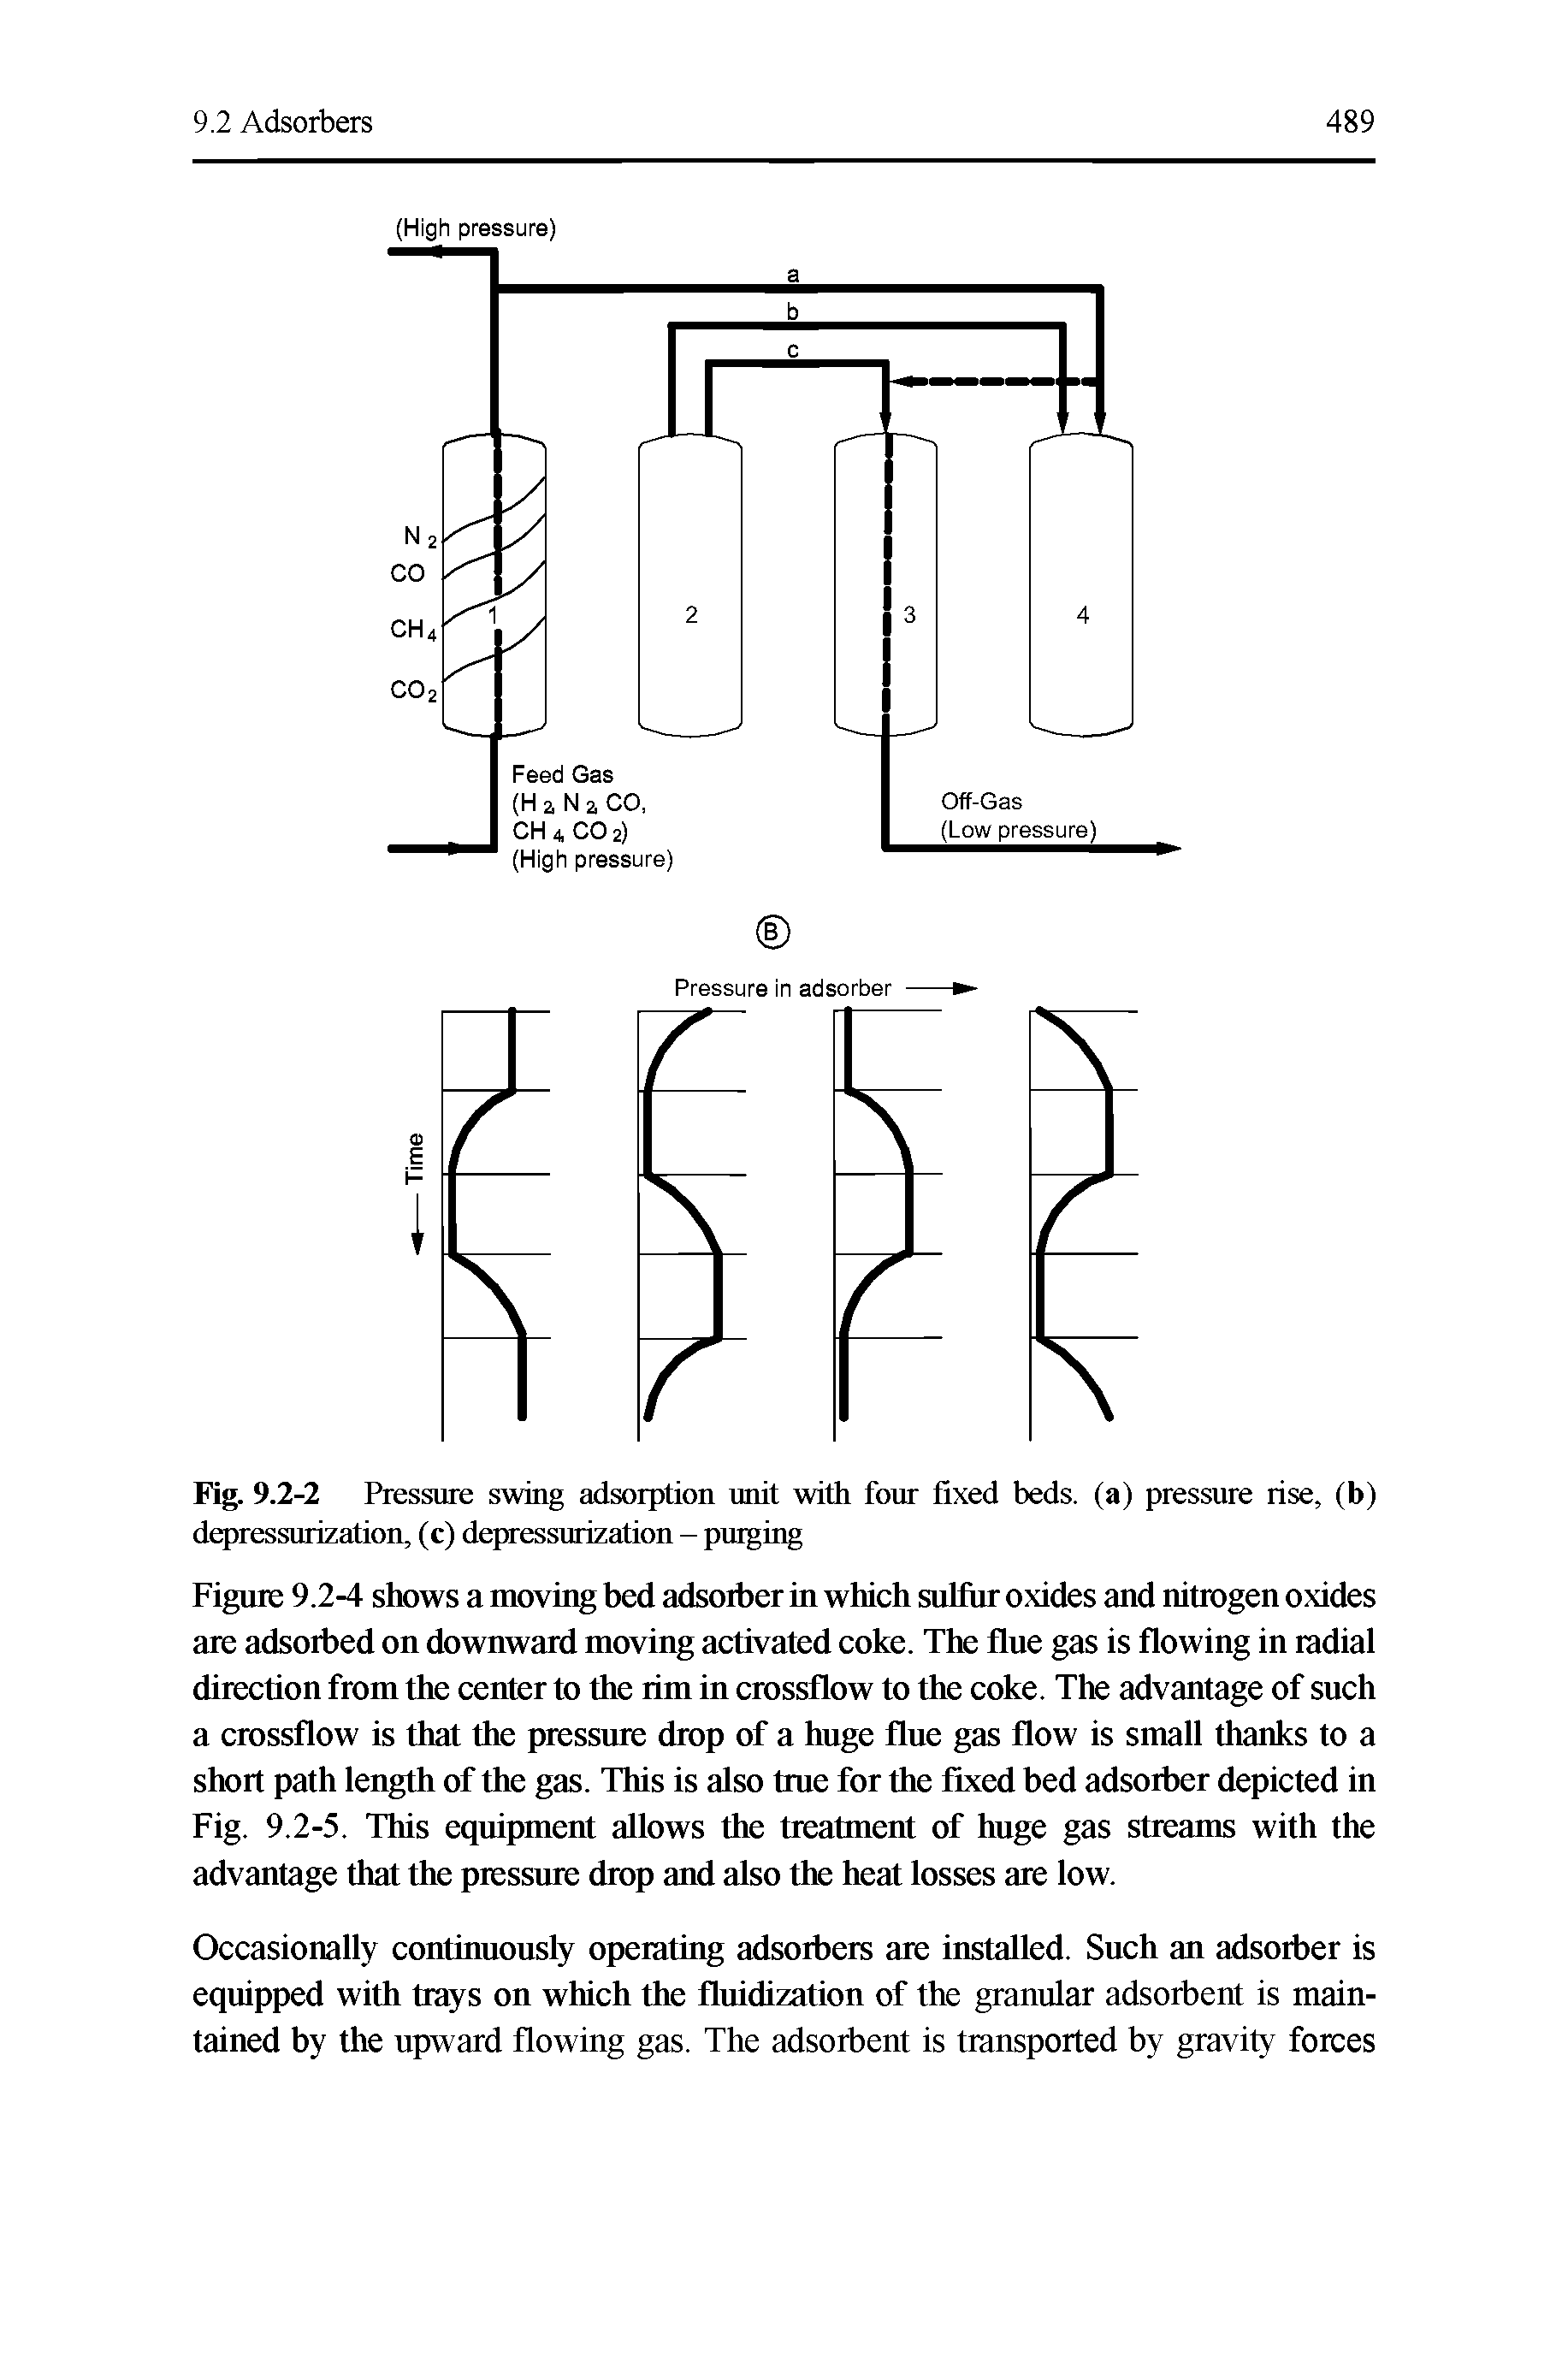 Figure 9.2-4 shows a moving bed adsorber in which sulfur oxides and nitrogen oxides are adsorbed on downward moving activated coke. The flue gas is flowing in radial direction from the center to the rim in crossflow to the coke. The advantage of such a crossflow is that the pressure drop of a huge flue gas flow is small thanks to a short path length of the gas. This is also fine for the fixed bed adsorber depicted in Fig. 9.2-5. This equipment allows the treatment of huge gas streams with the advantage that the pressure drop and also the heat losses are low.